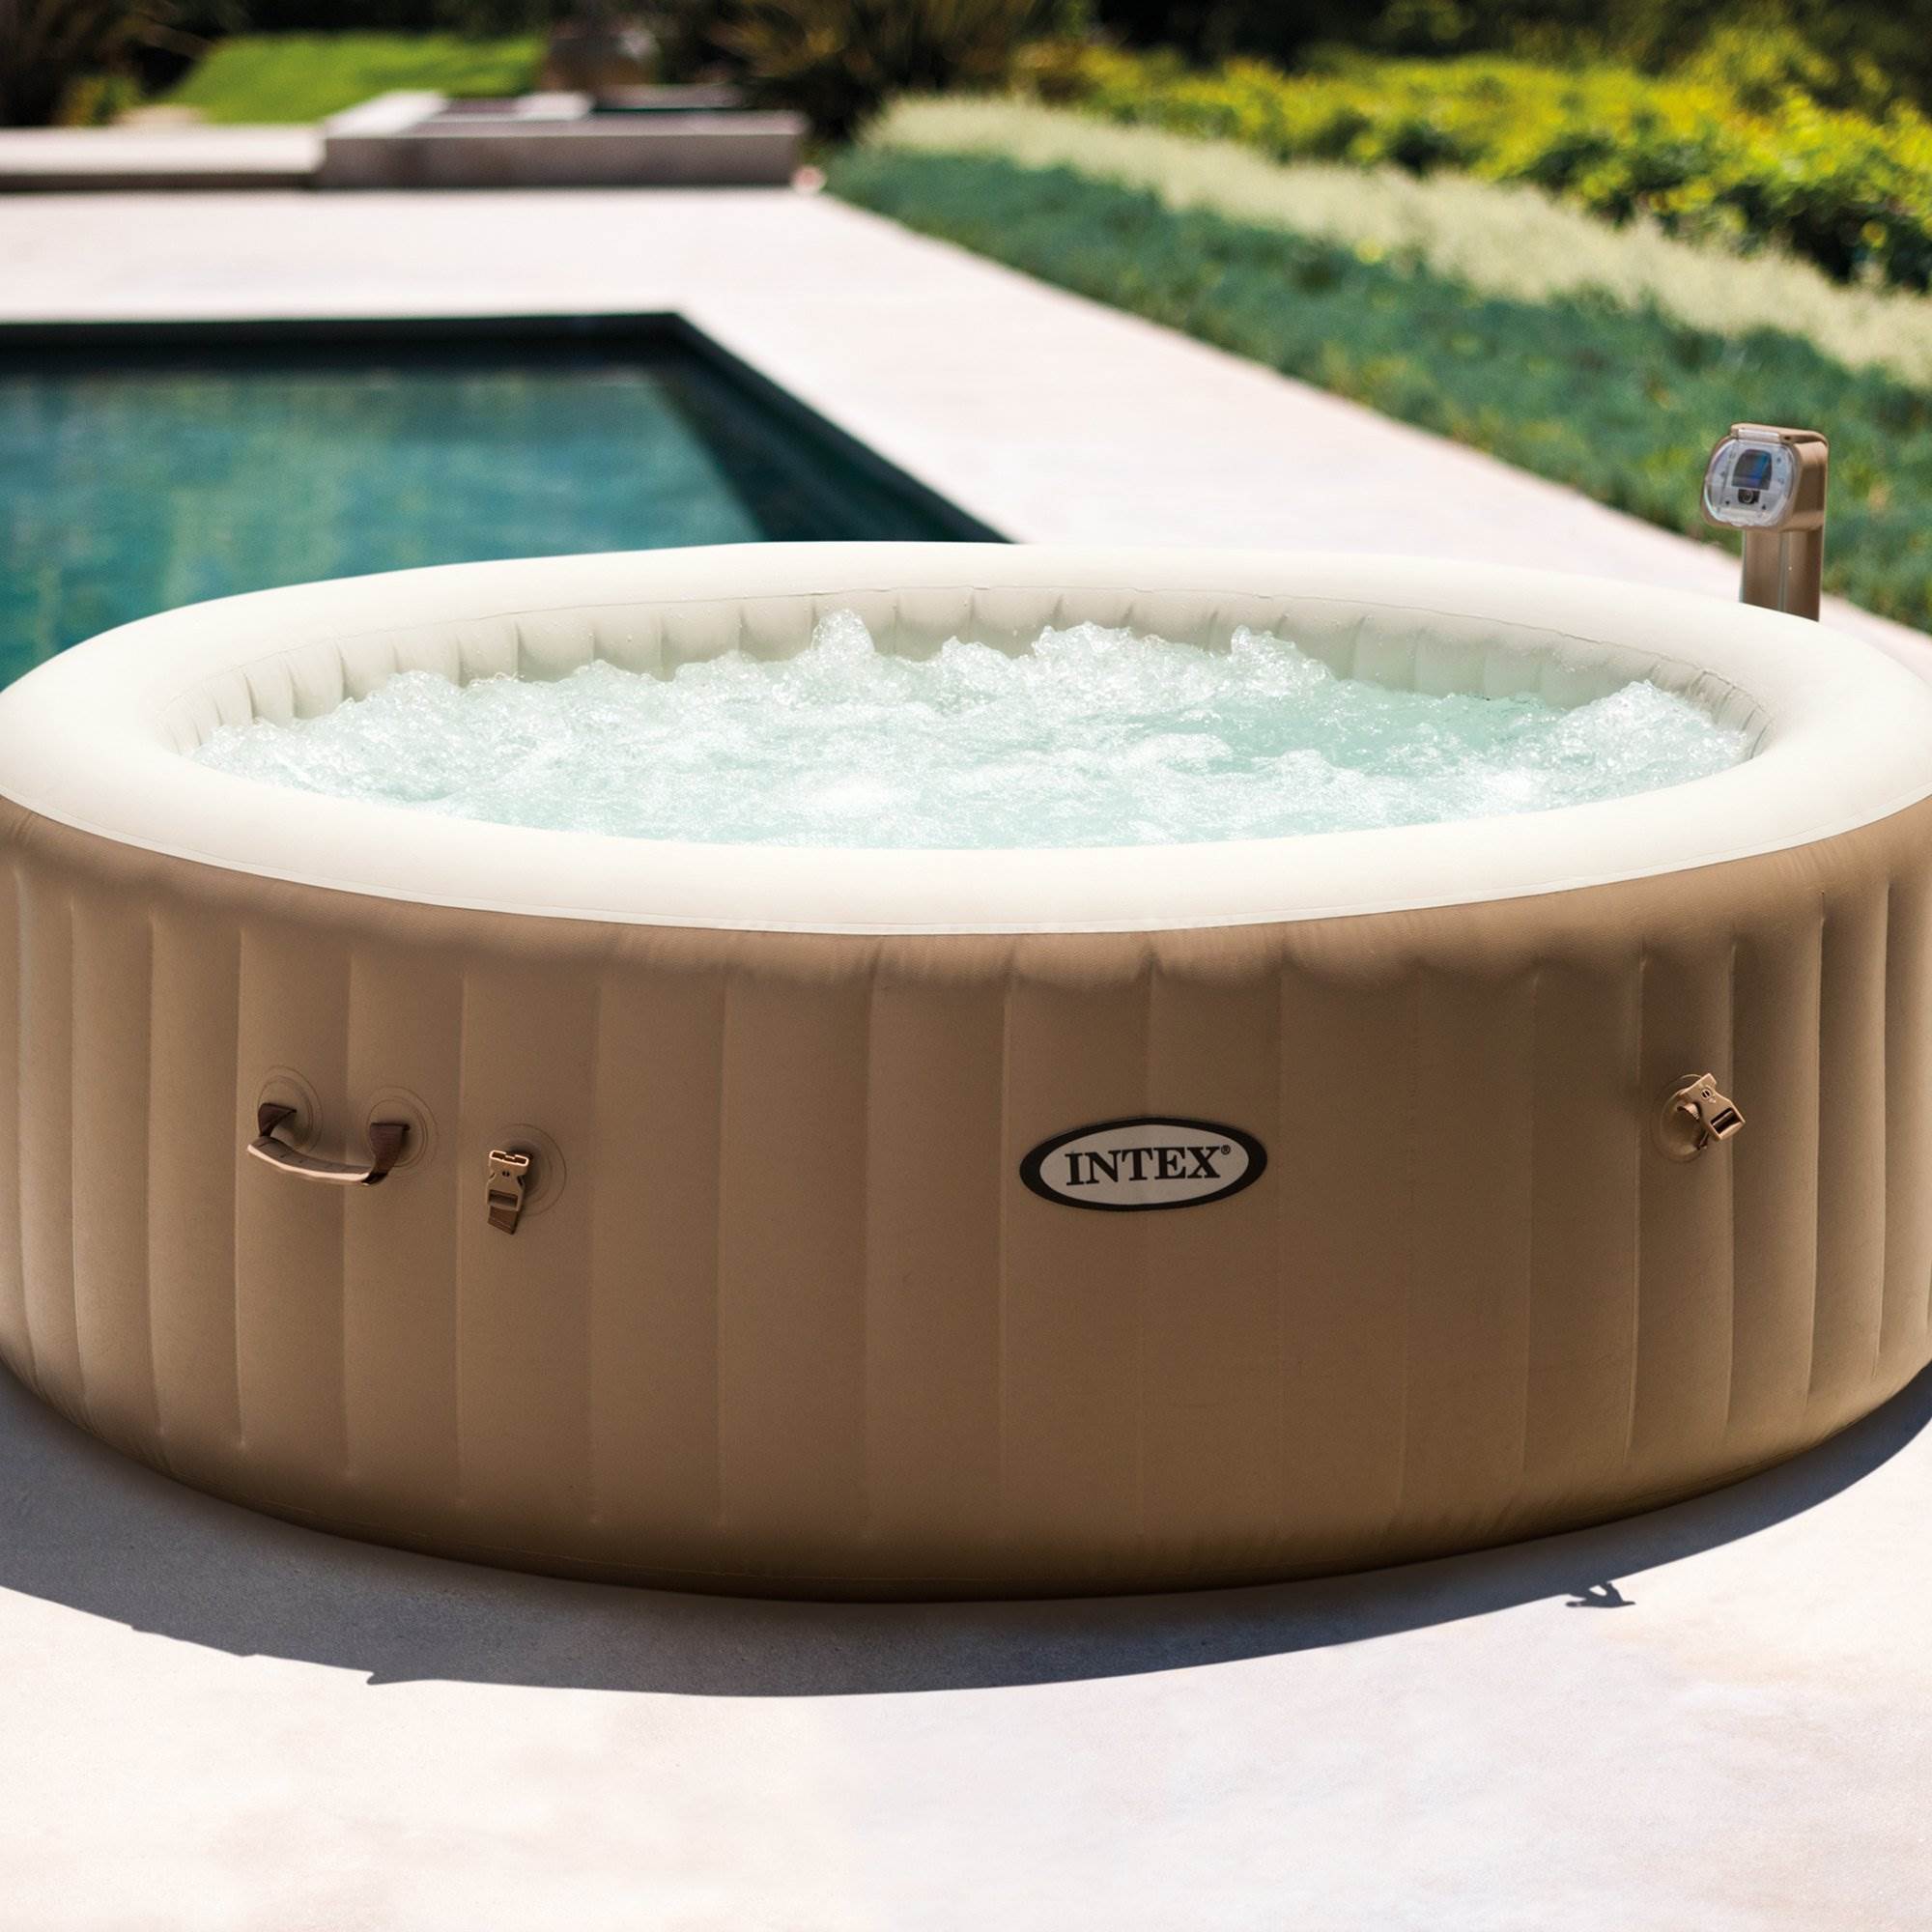 Intex Inflatable Pure Spa 6 Person Heated Bubble Jet Hot Tub Battery Led Light 78257319817 Ebay